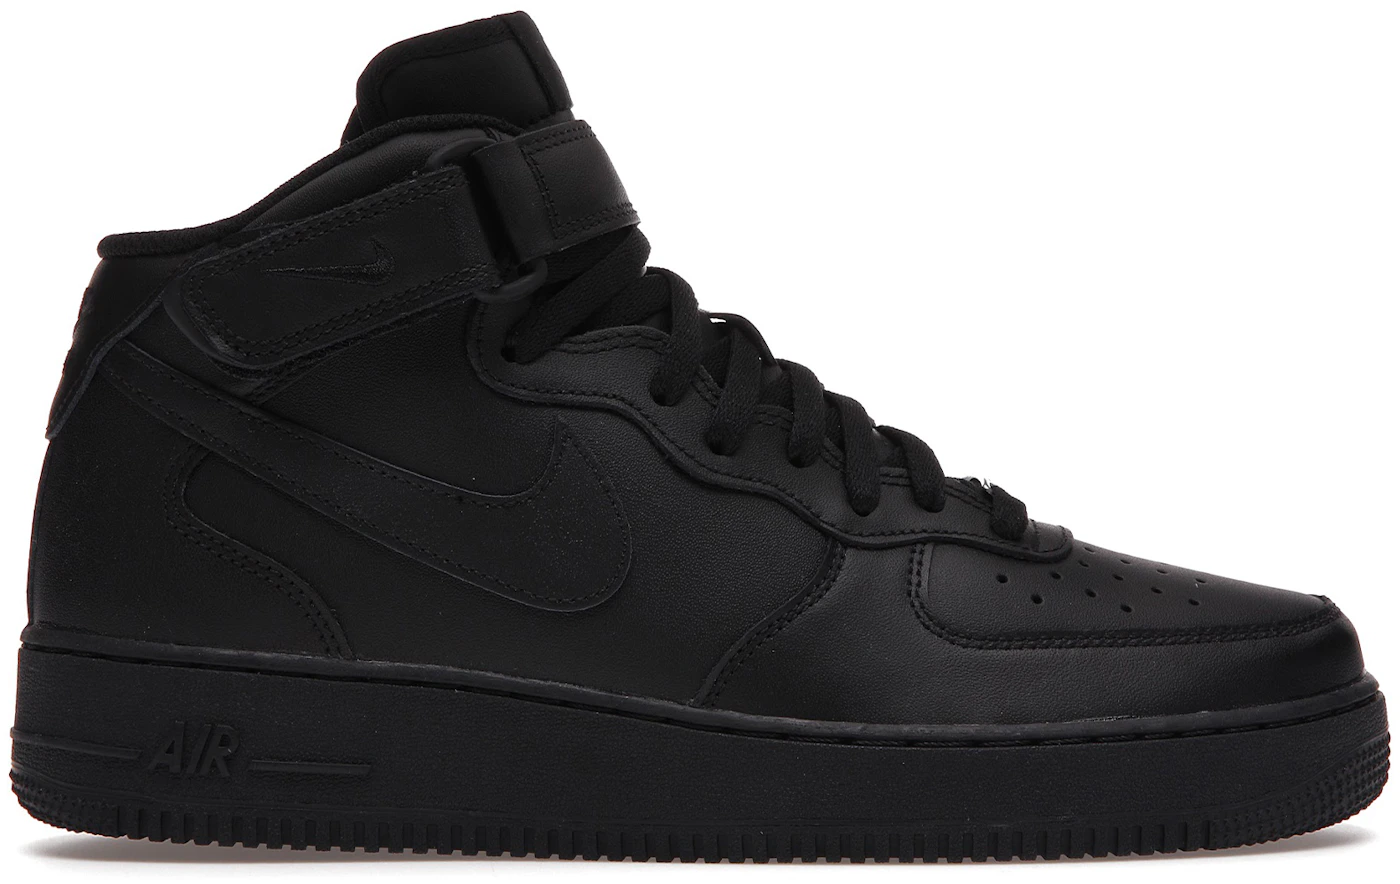 Nike Air Force 1 Mid '07 Triple Black Sneakers CW2289-001 Men's Size 11 NEW